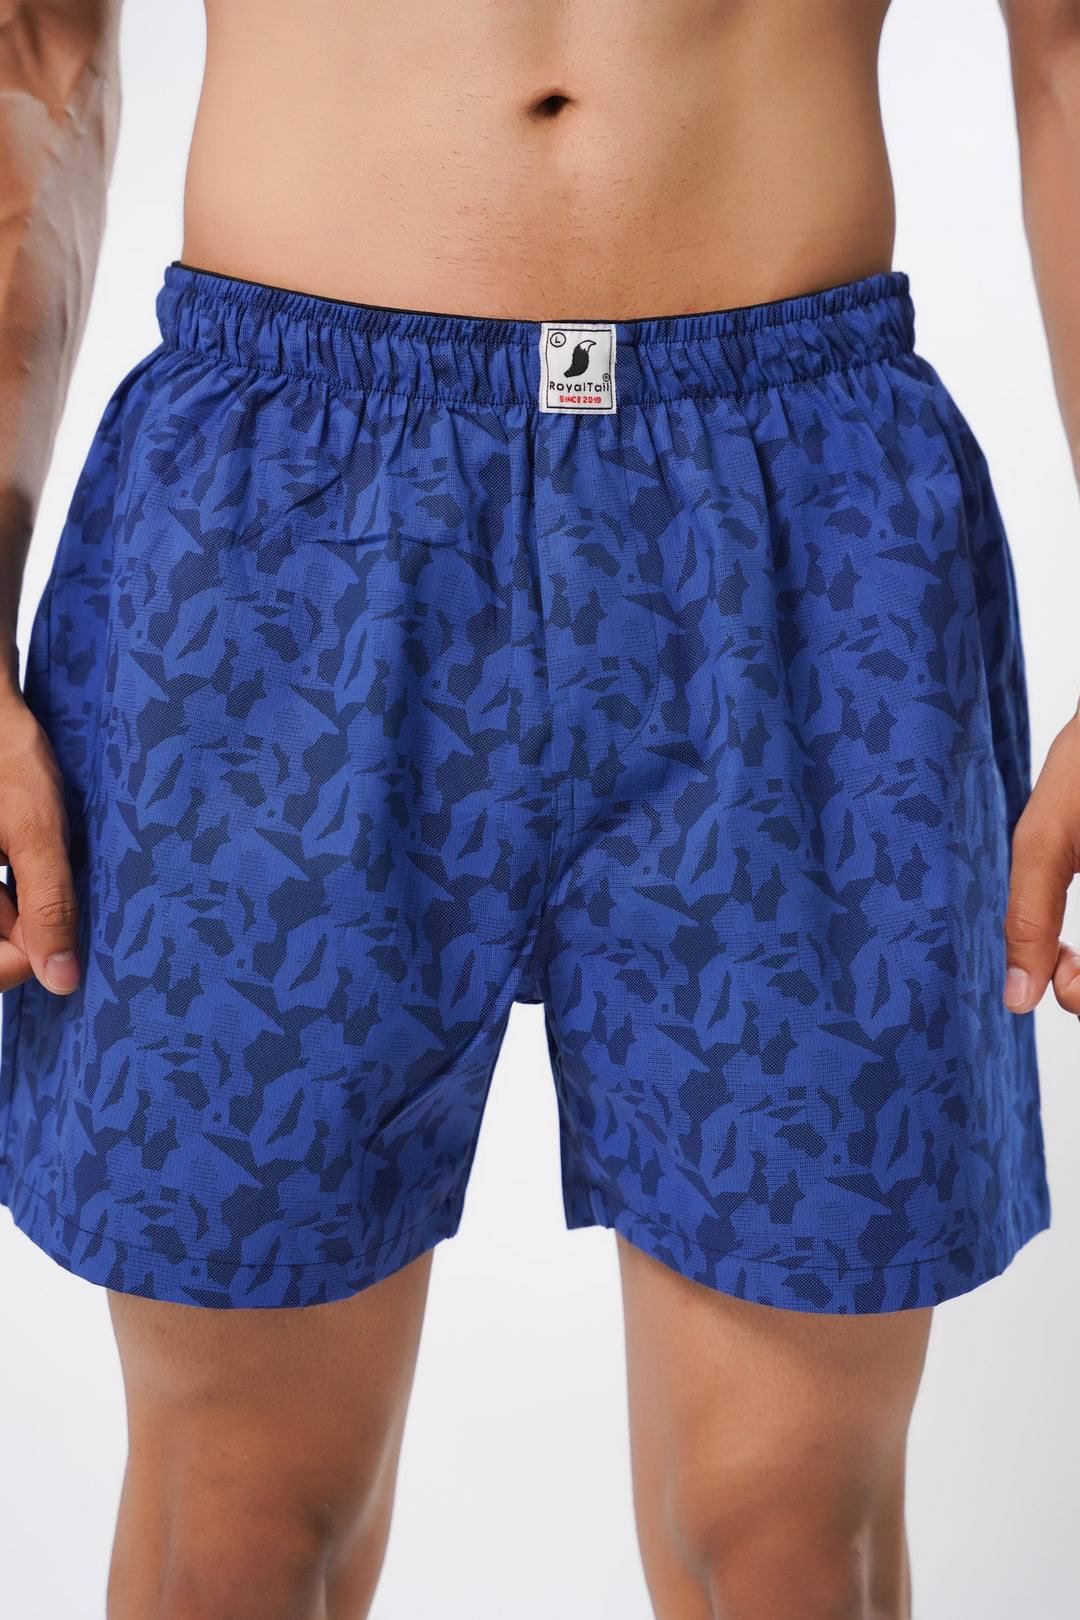 Blue All Over Printed Men's Boxers - Royaltail